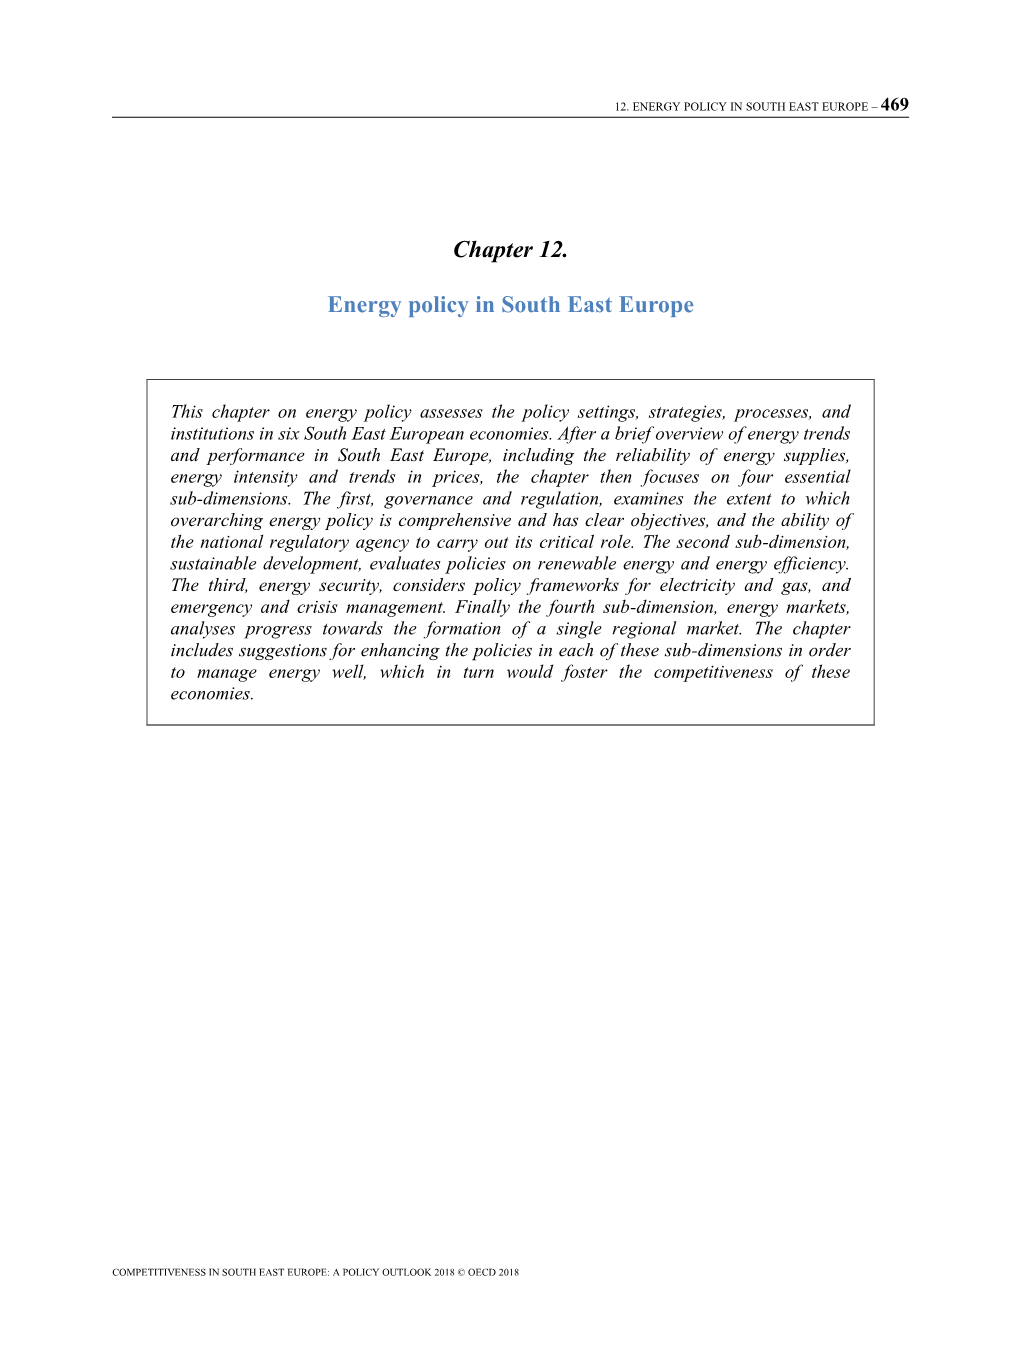 Chapter 12. Energy Policy in South East Europe